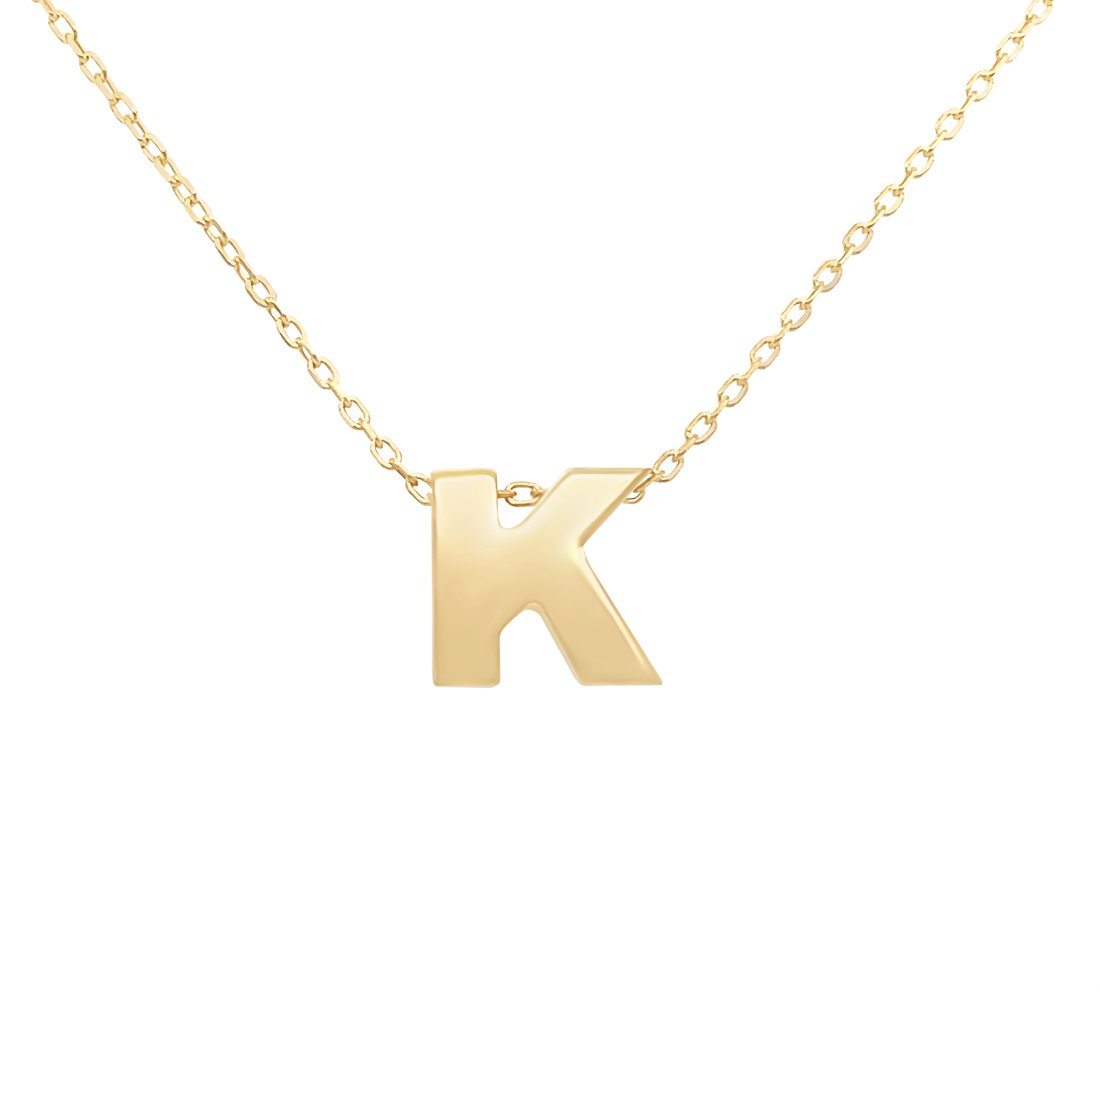 9ct Yellow Gold Silver Infused Initial Pendant Necklace Necklaces Bevilles K 